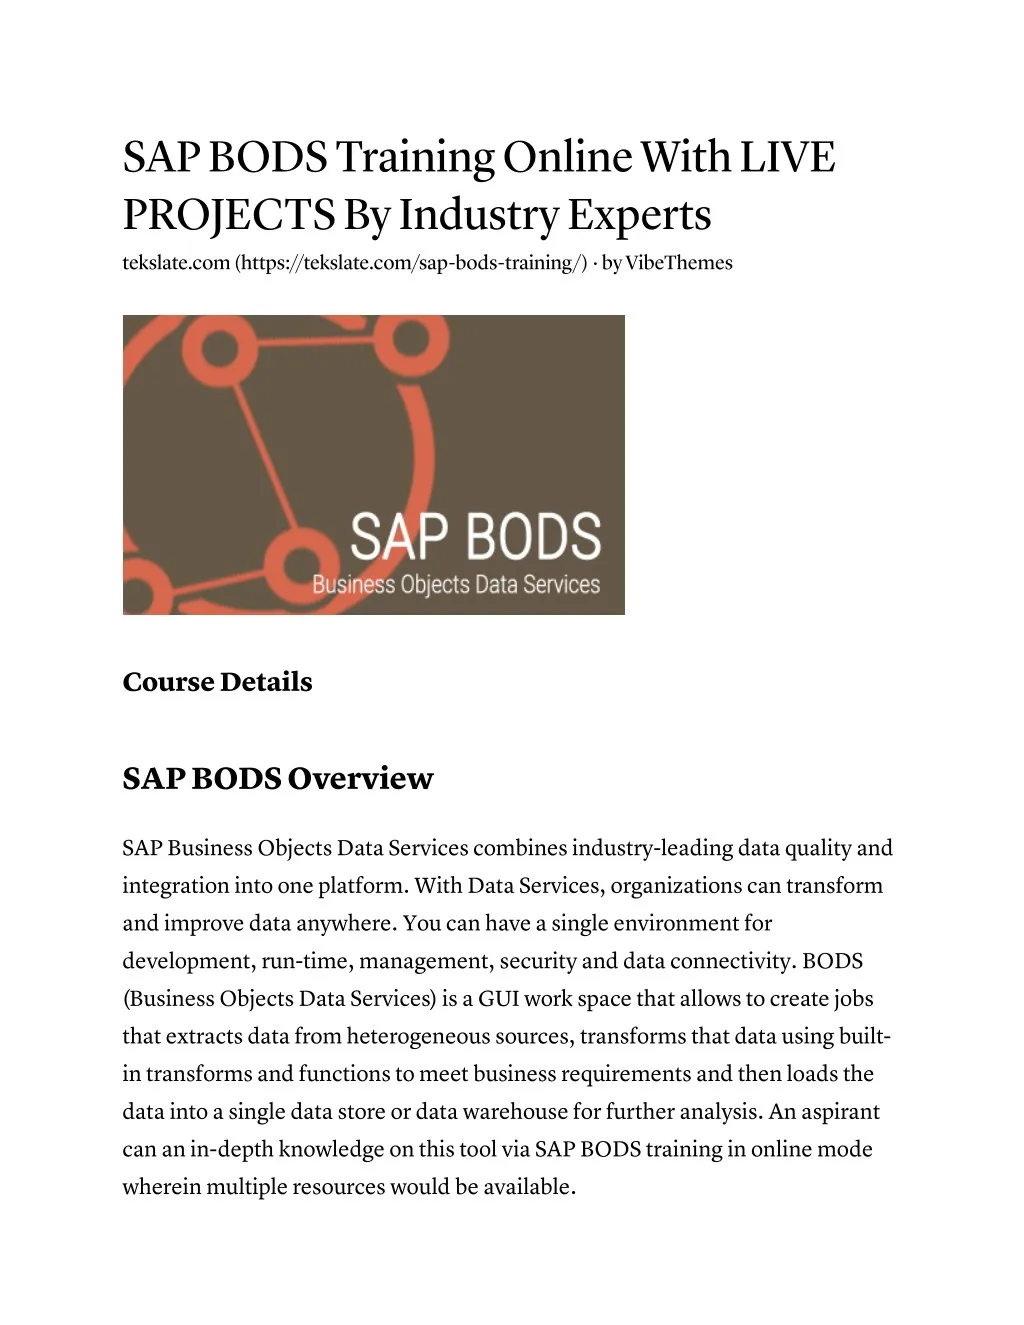 sap bods training online with live projects